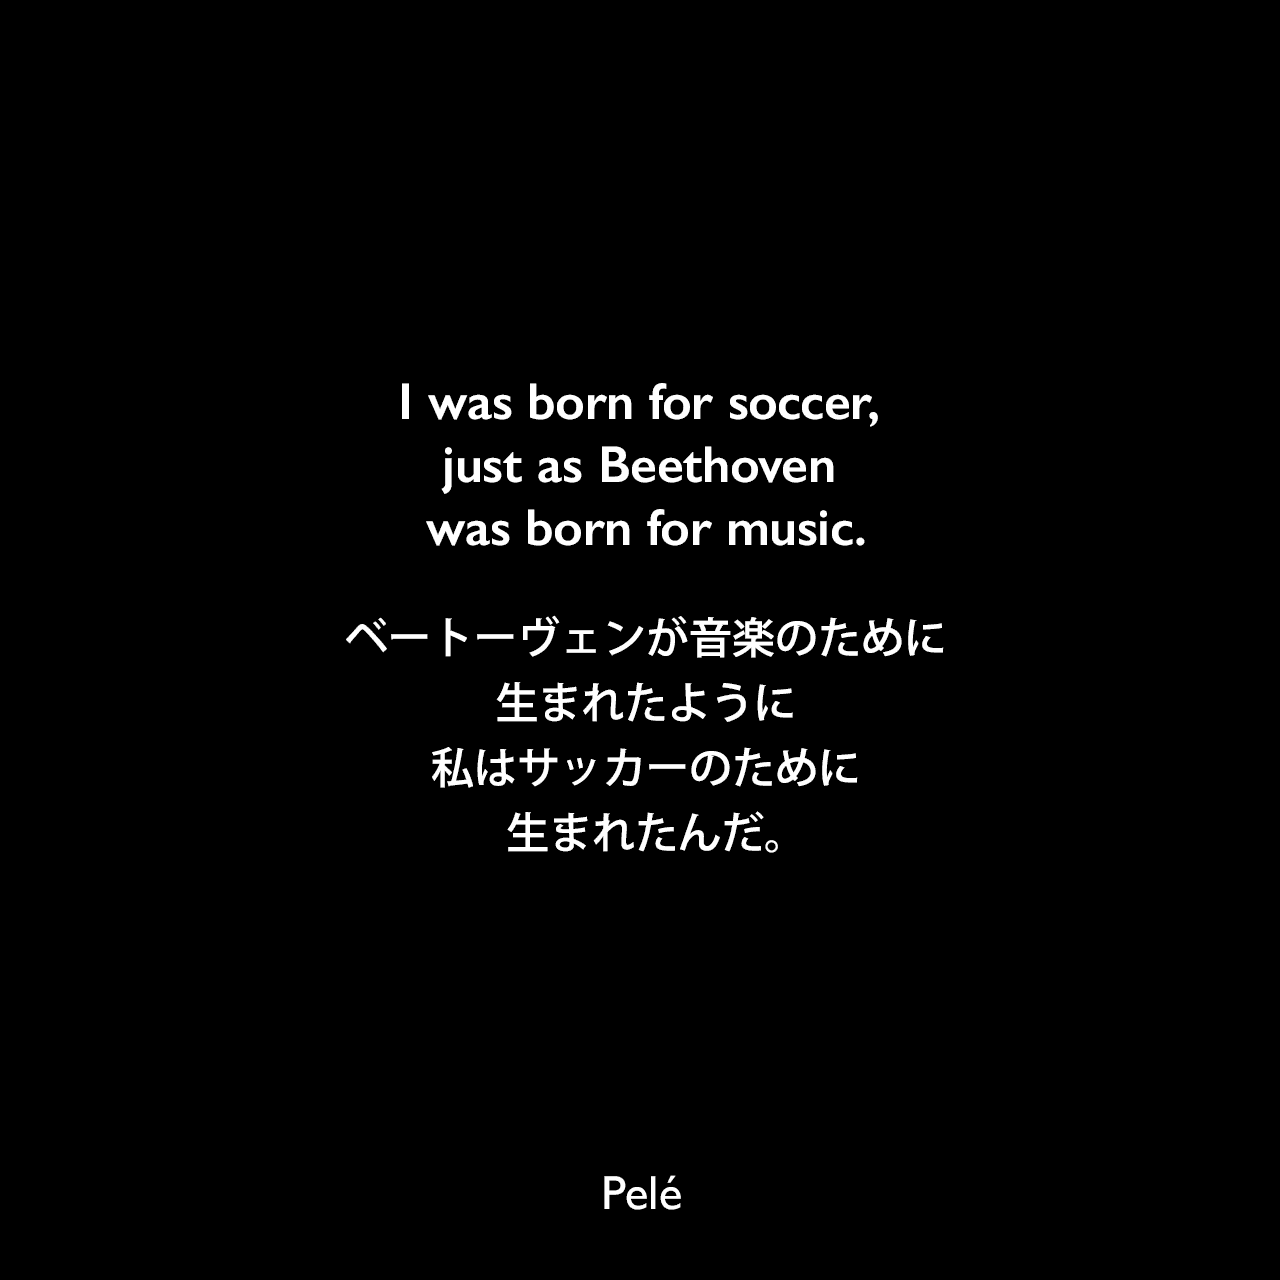 I was born for soccer, just as Beethoven was born for music.ベートーヴェンが音楽のために生まれたように、私はサッカーのために生まれたんだ。- パートン・キーズによる本「The measure of greatness (1980)」よりPelé